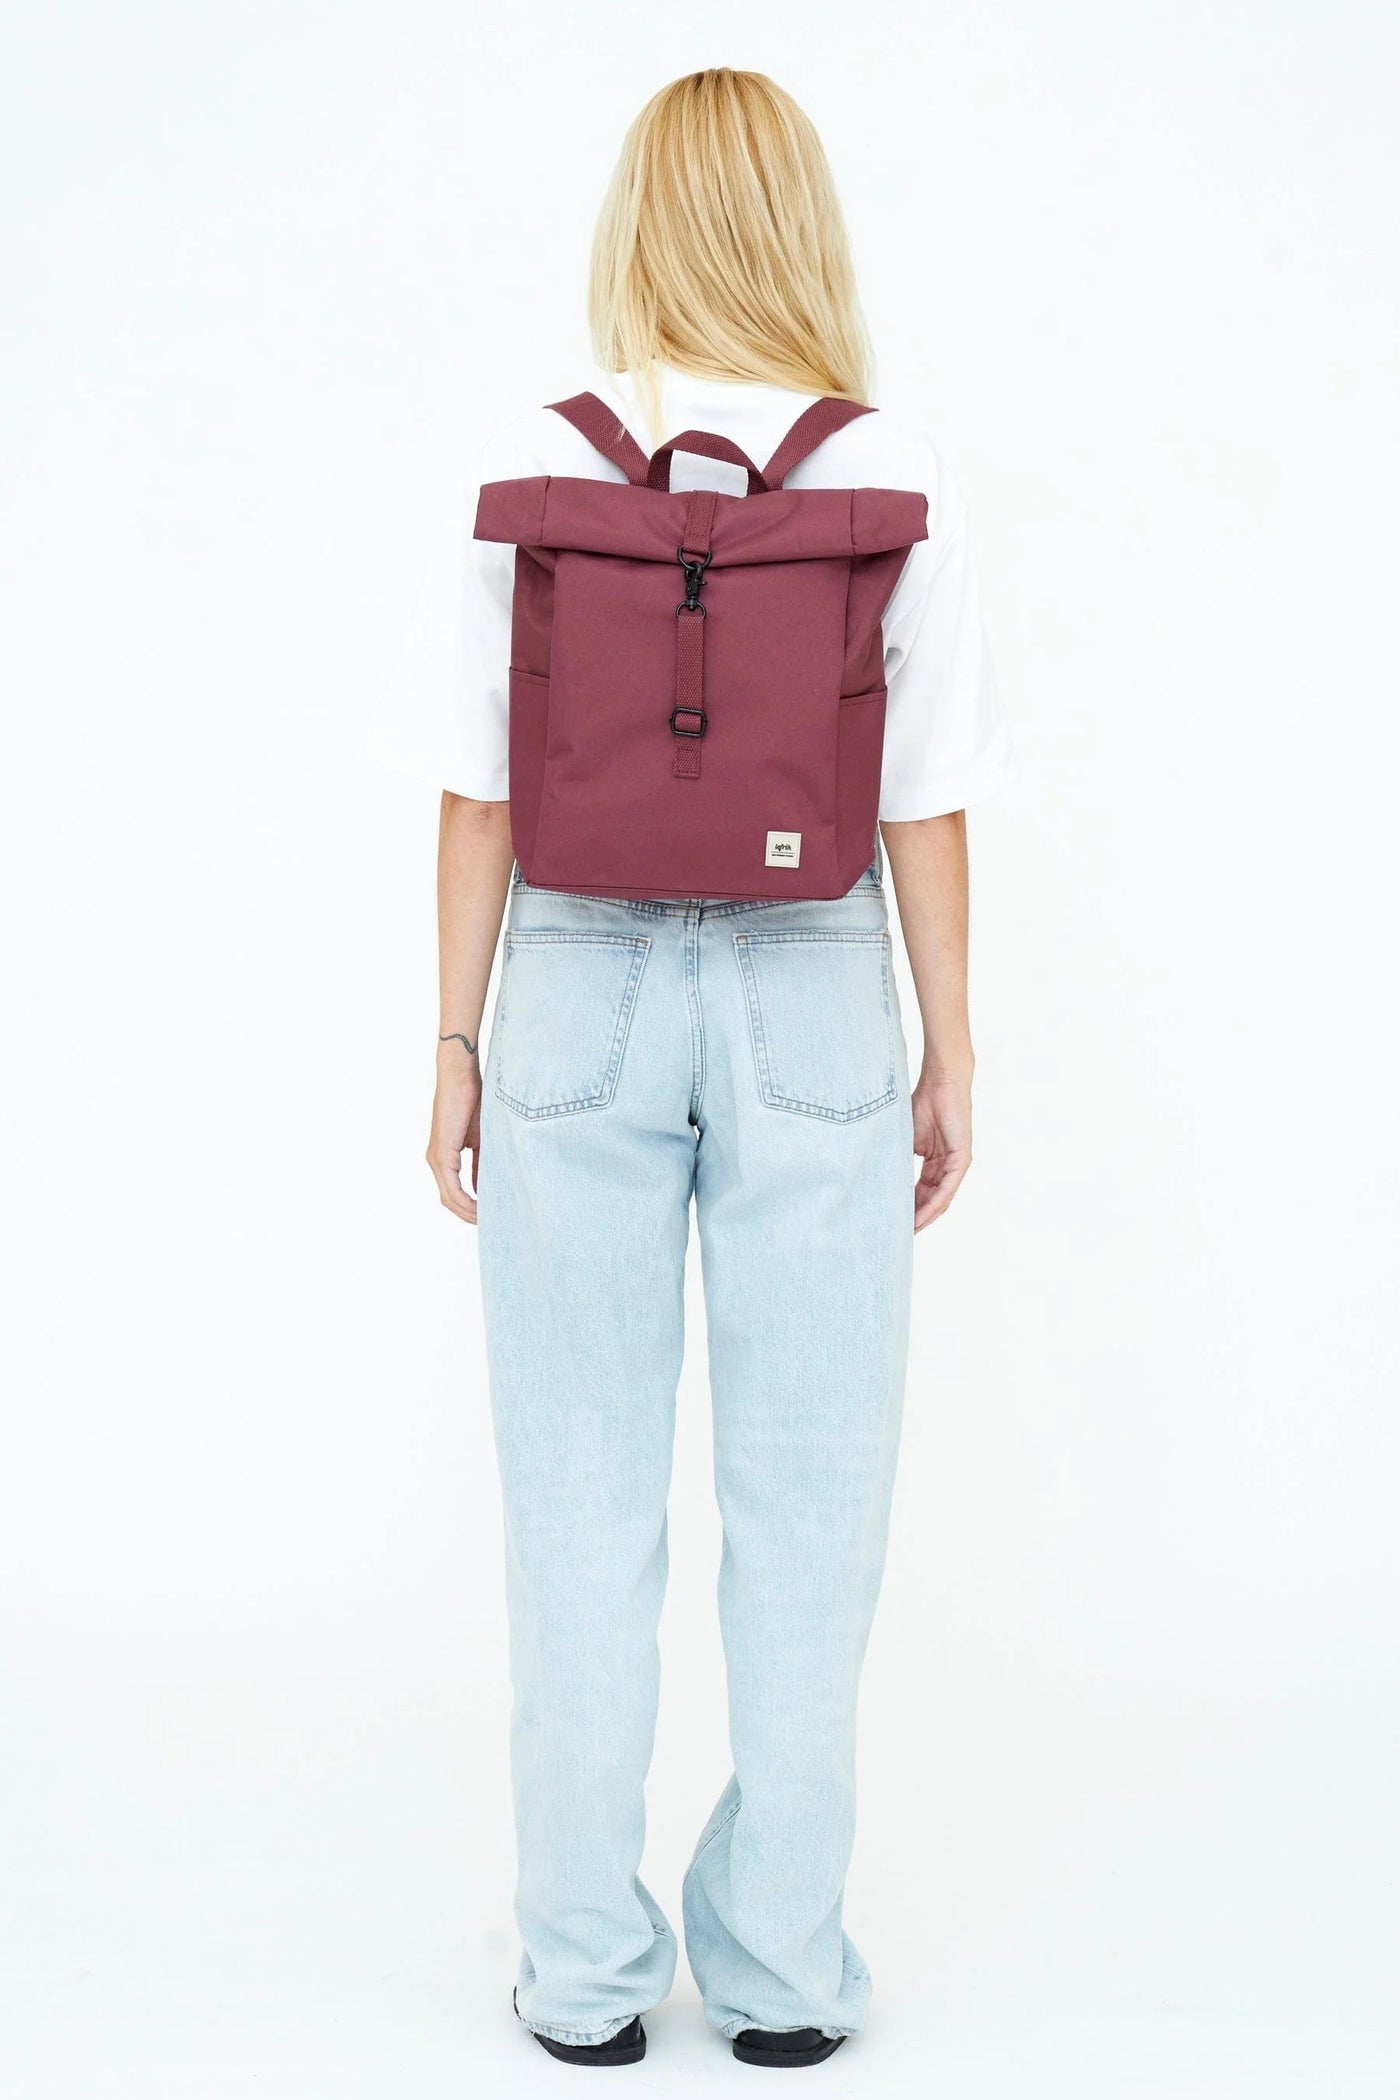 Lefrik Mini Roll in Plum-Accessories-Ohh! By Gum - Shop Sustainable